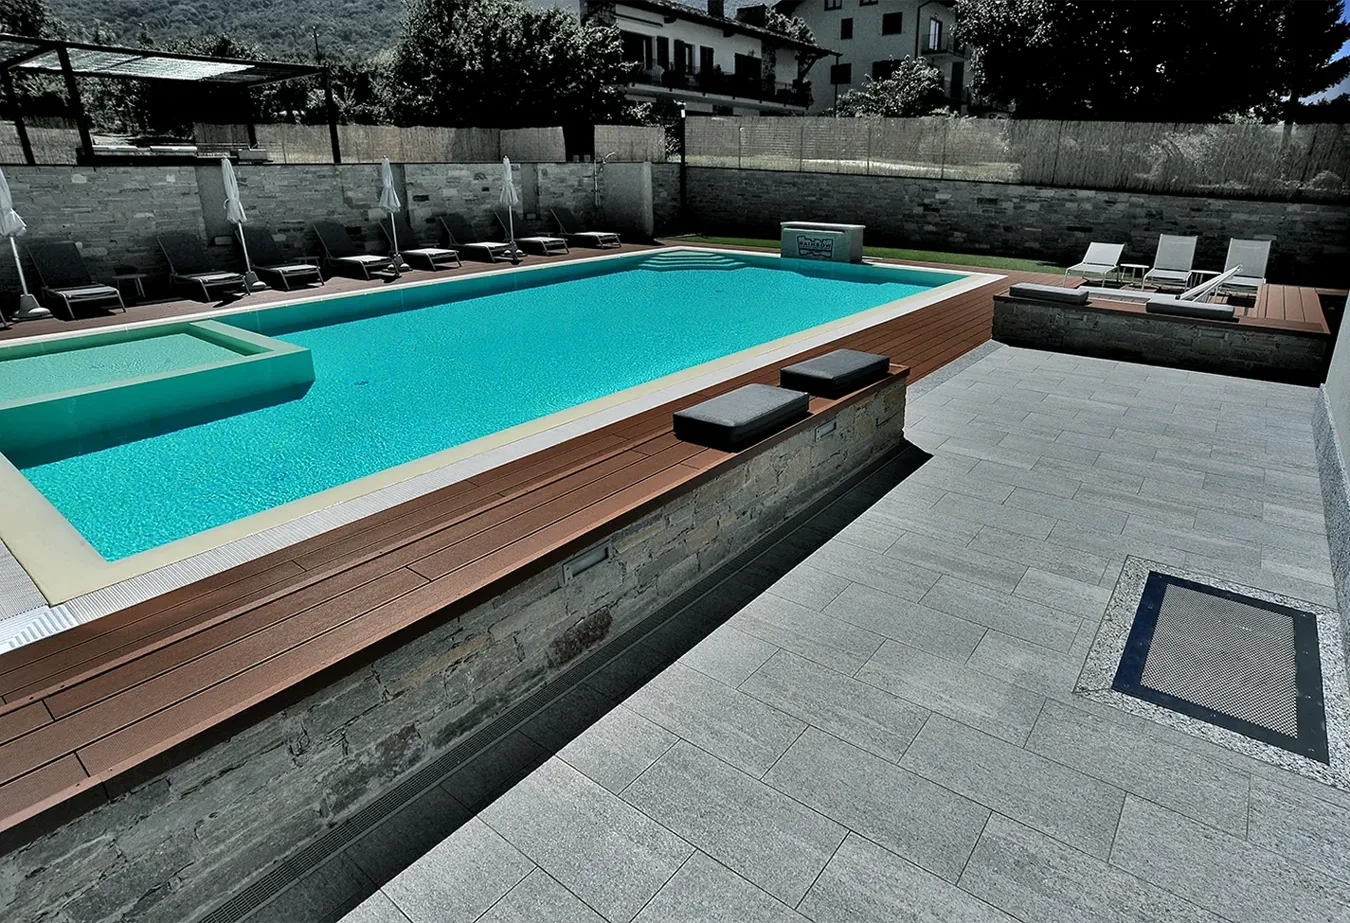 Strength and safety: ideas for covering your pool with porcelain stoneware tiles